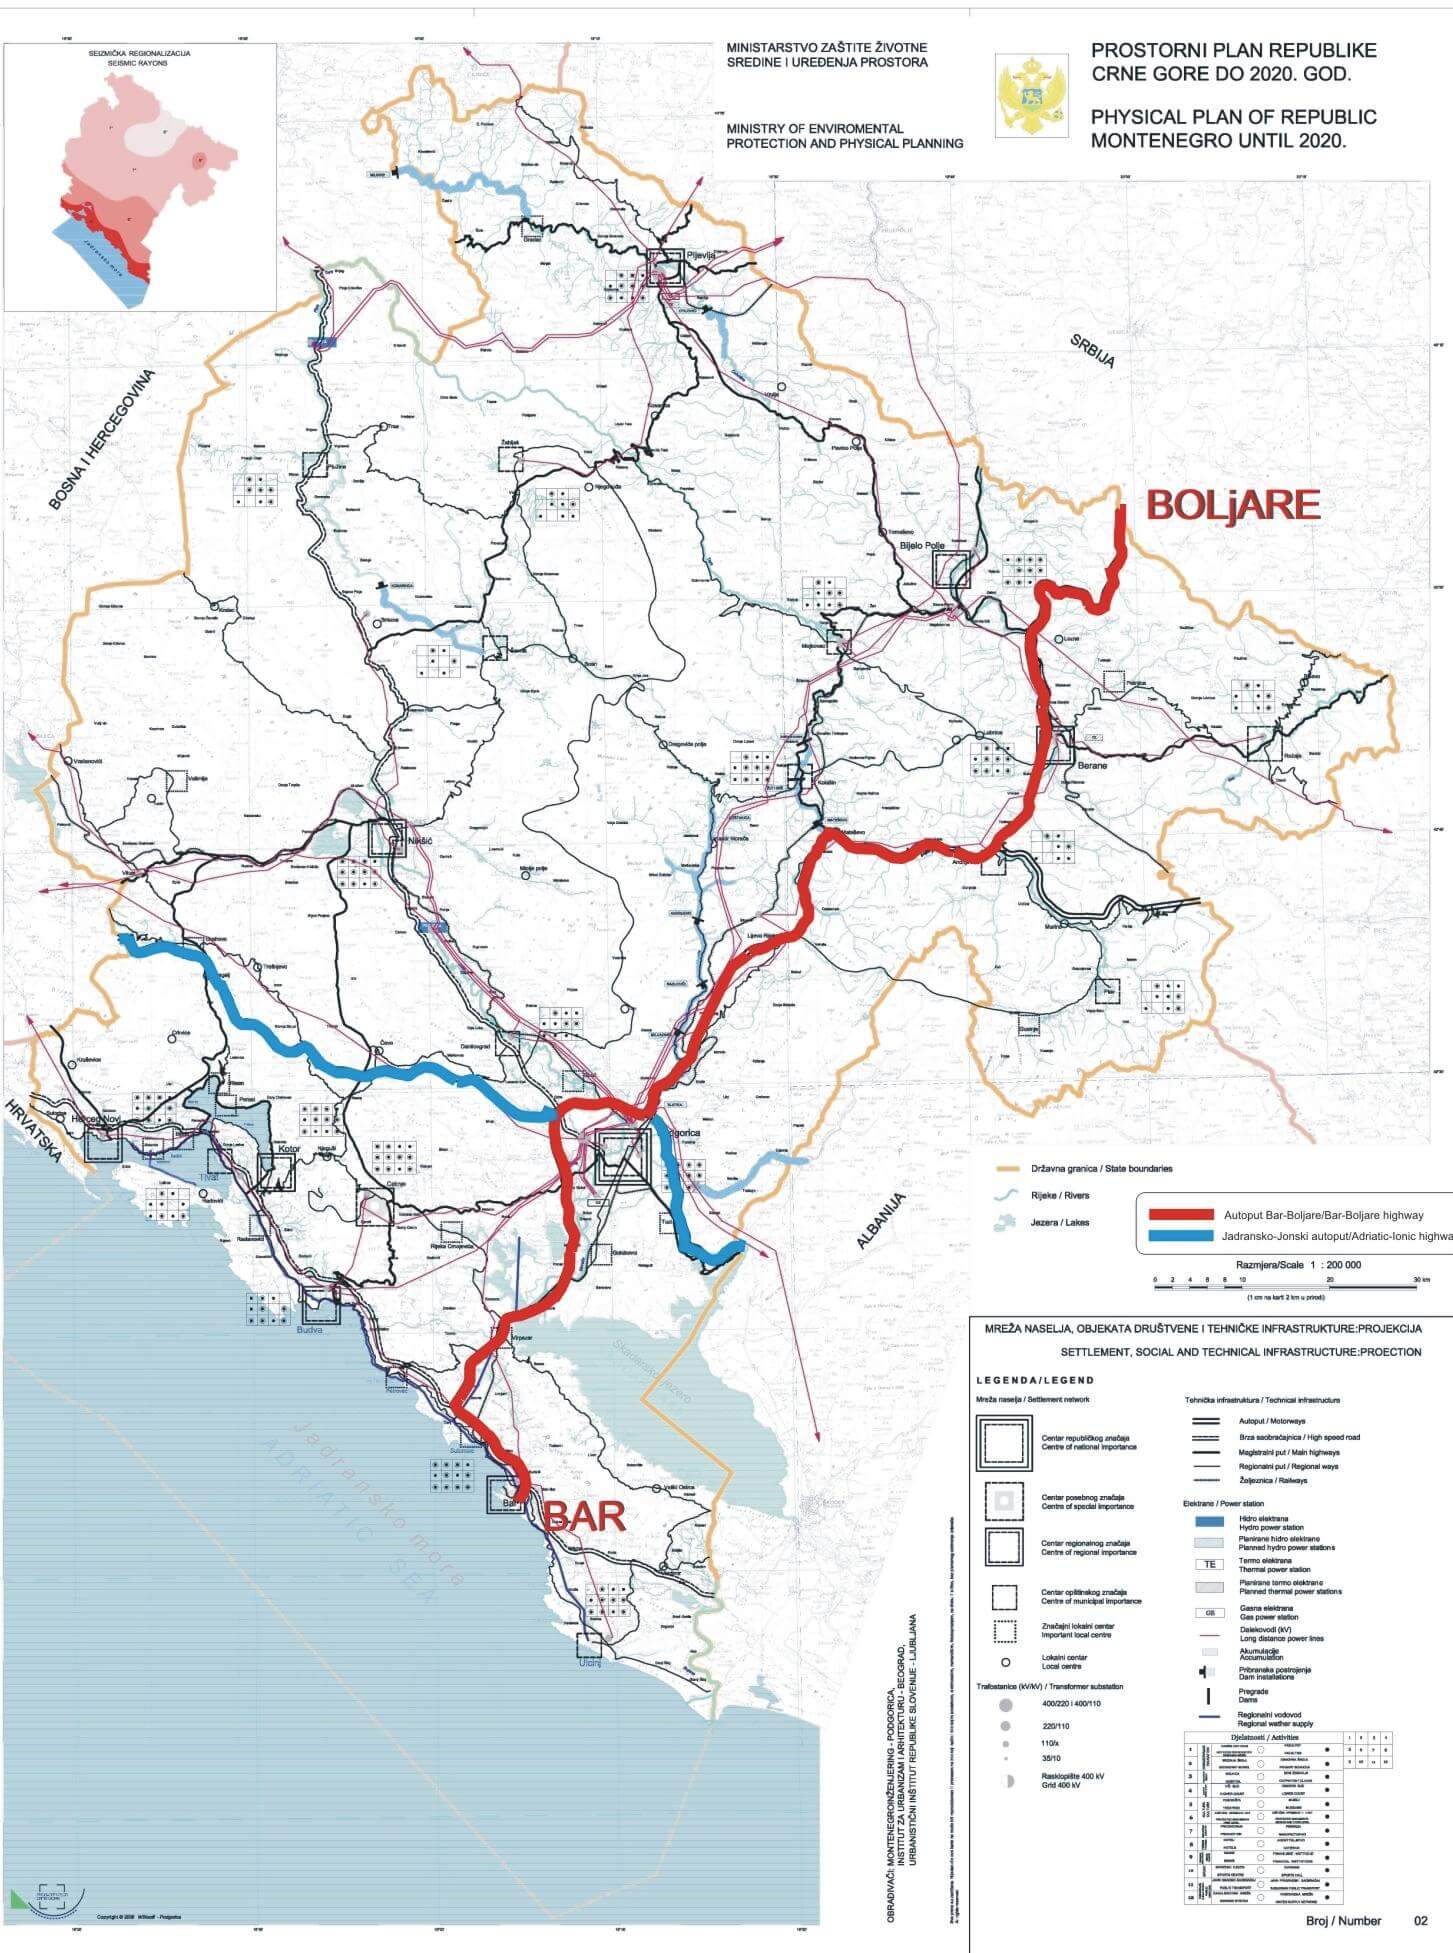 Sosic - Planned network of Montenegrin motorways - the Beograd-Bar motorway (red) and the Adriatic-Ionian motorway (blue). Wikimediacommons